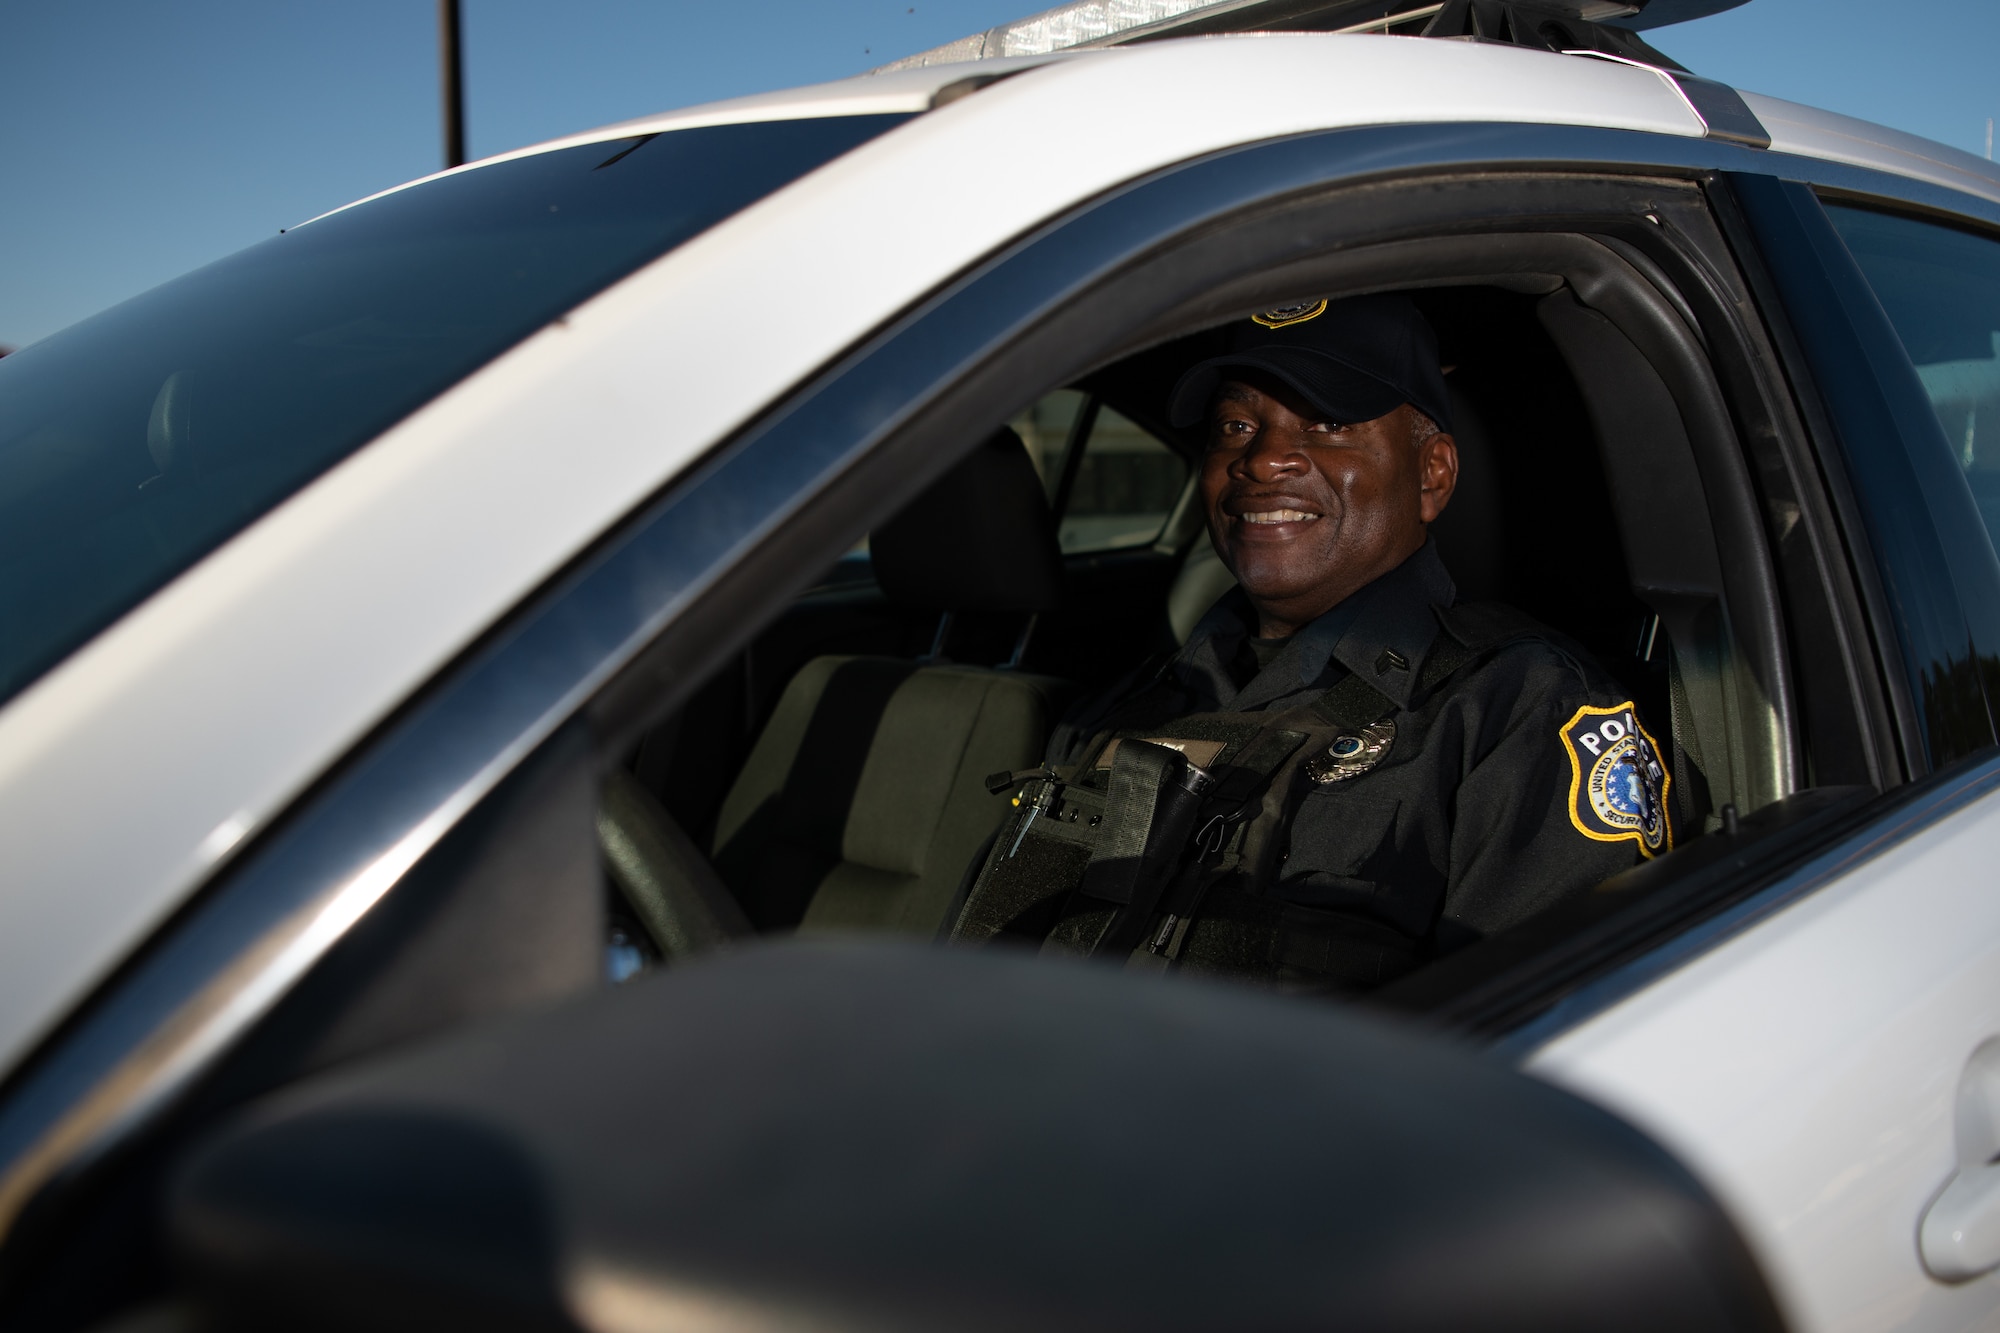 Morris Barnes, a flight sergeant with the 42nd Security Forces Squadron, poses for a photo inside a patrol car Dec. 12, 2021, on Maxwell Air Force Base, Alabama. Barnes served in the Air Force for 26 years before he began working as a civilian defender on Maxwell.